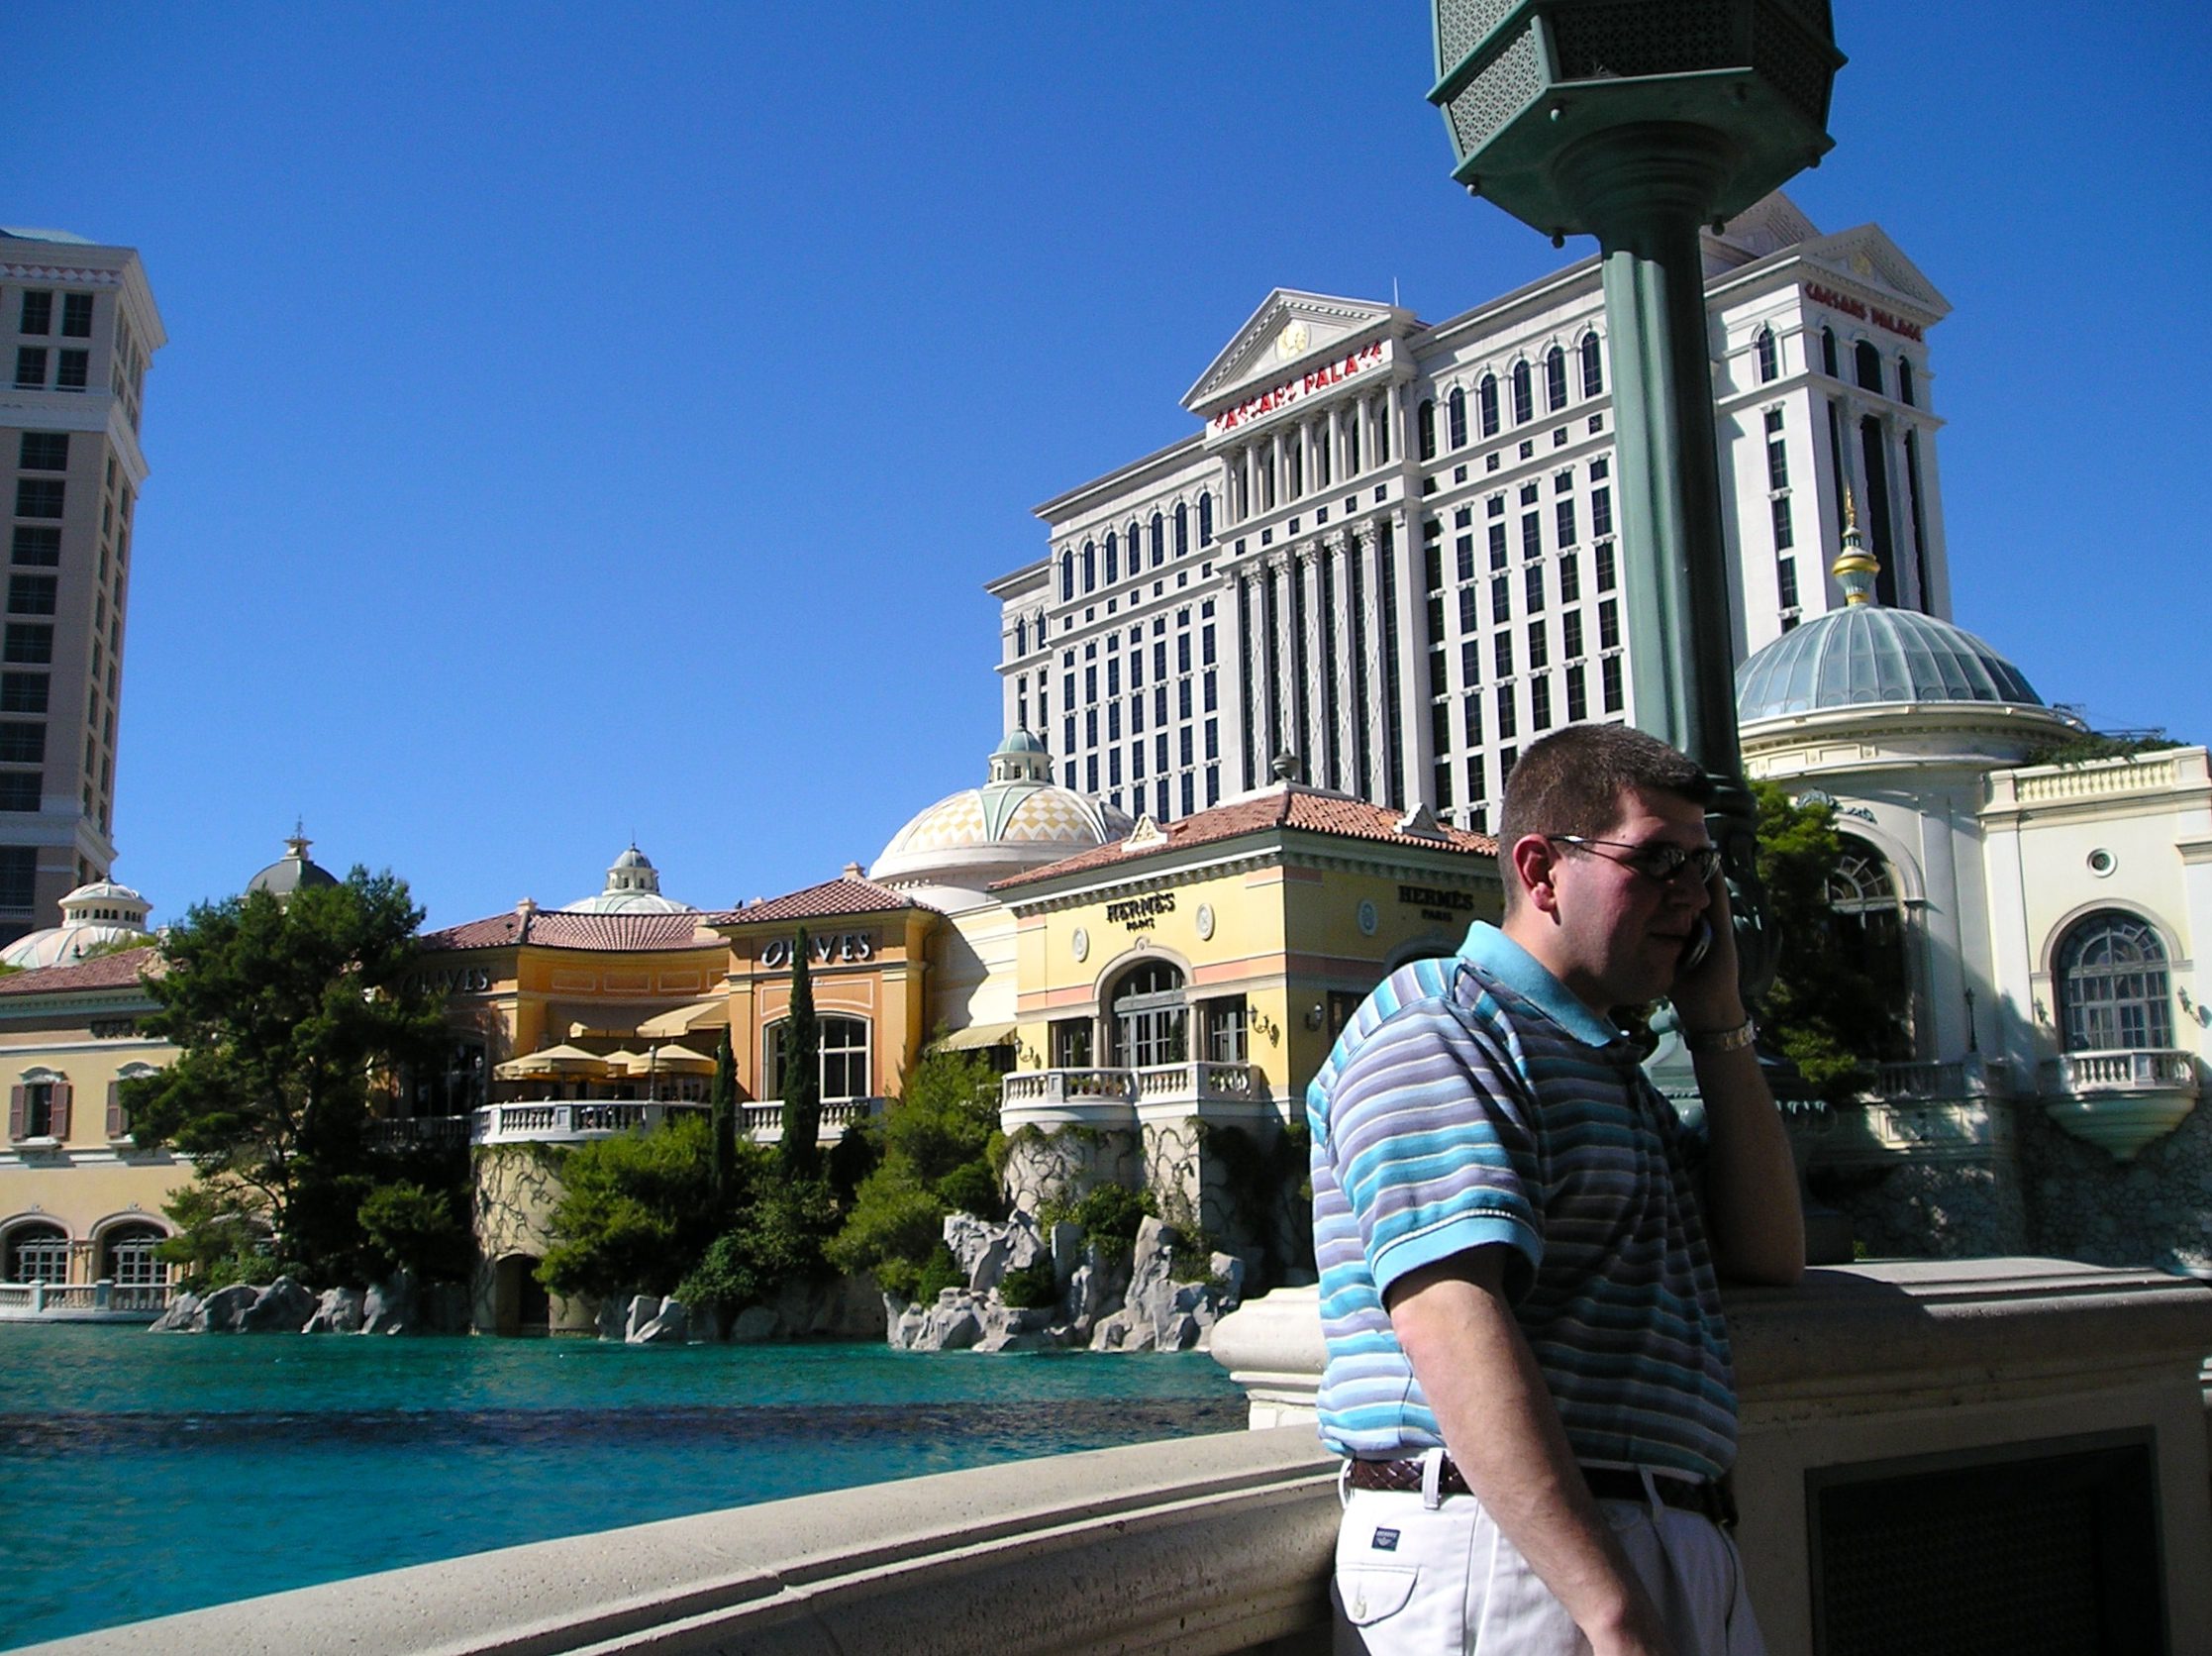 a man standing by a pool with buildings in the background